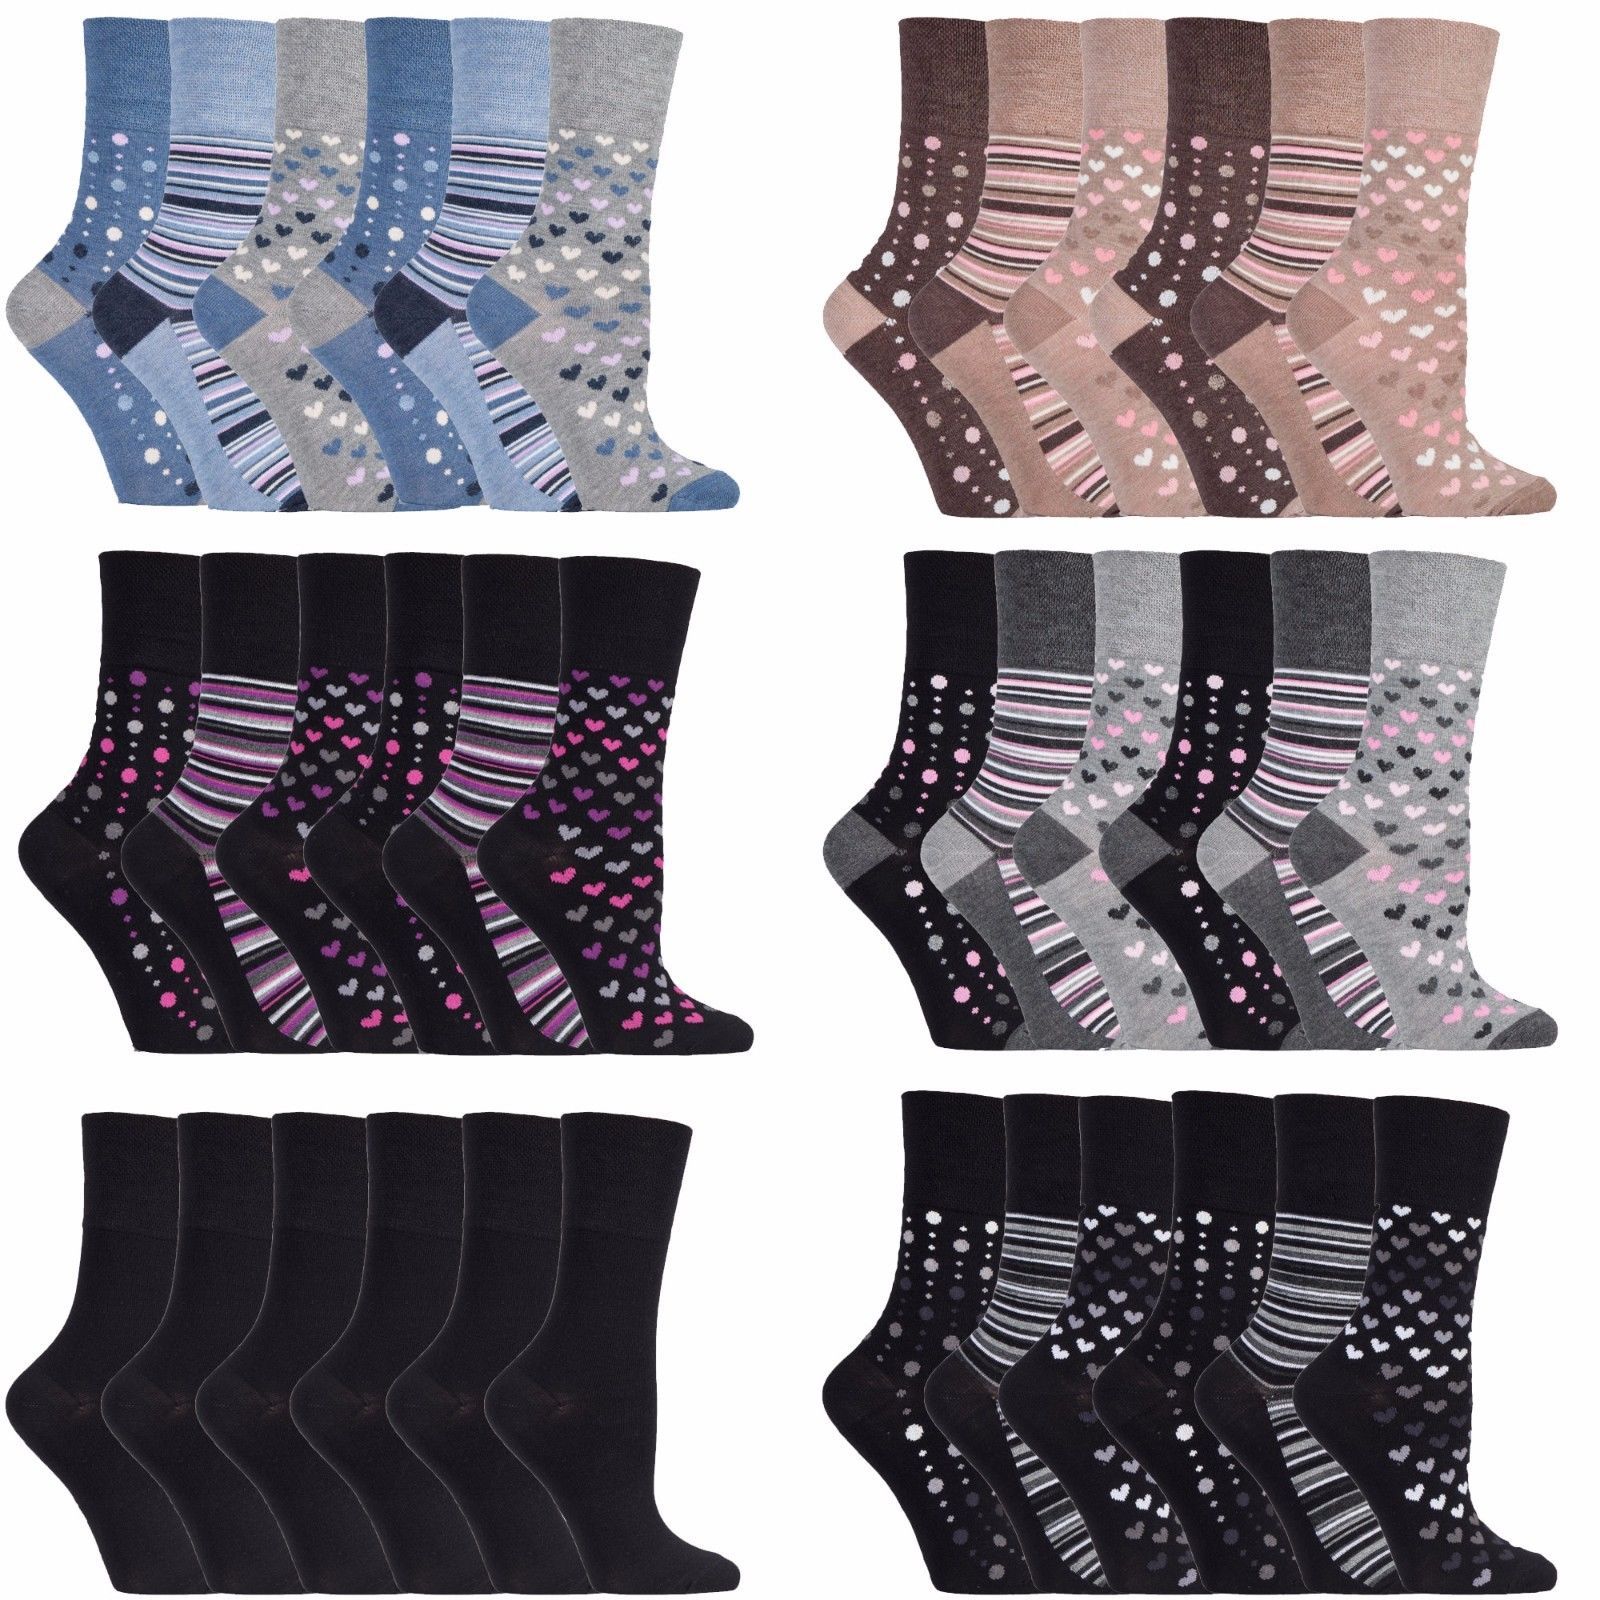 Gentle Grip - 6 Pairs Ladies Breathable Loose Soft Top Non Elastic Bamboo Socks